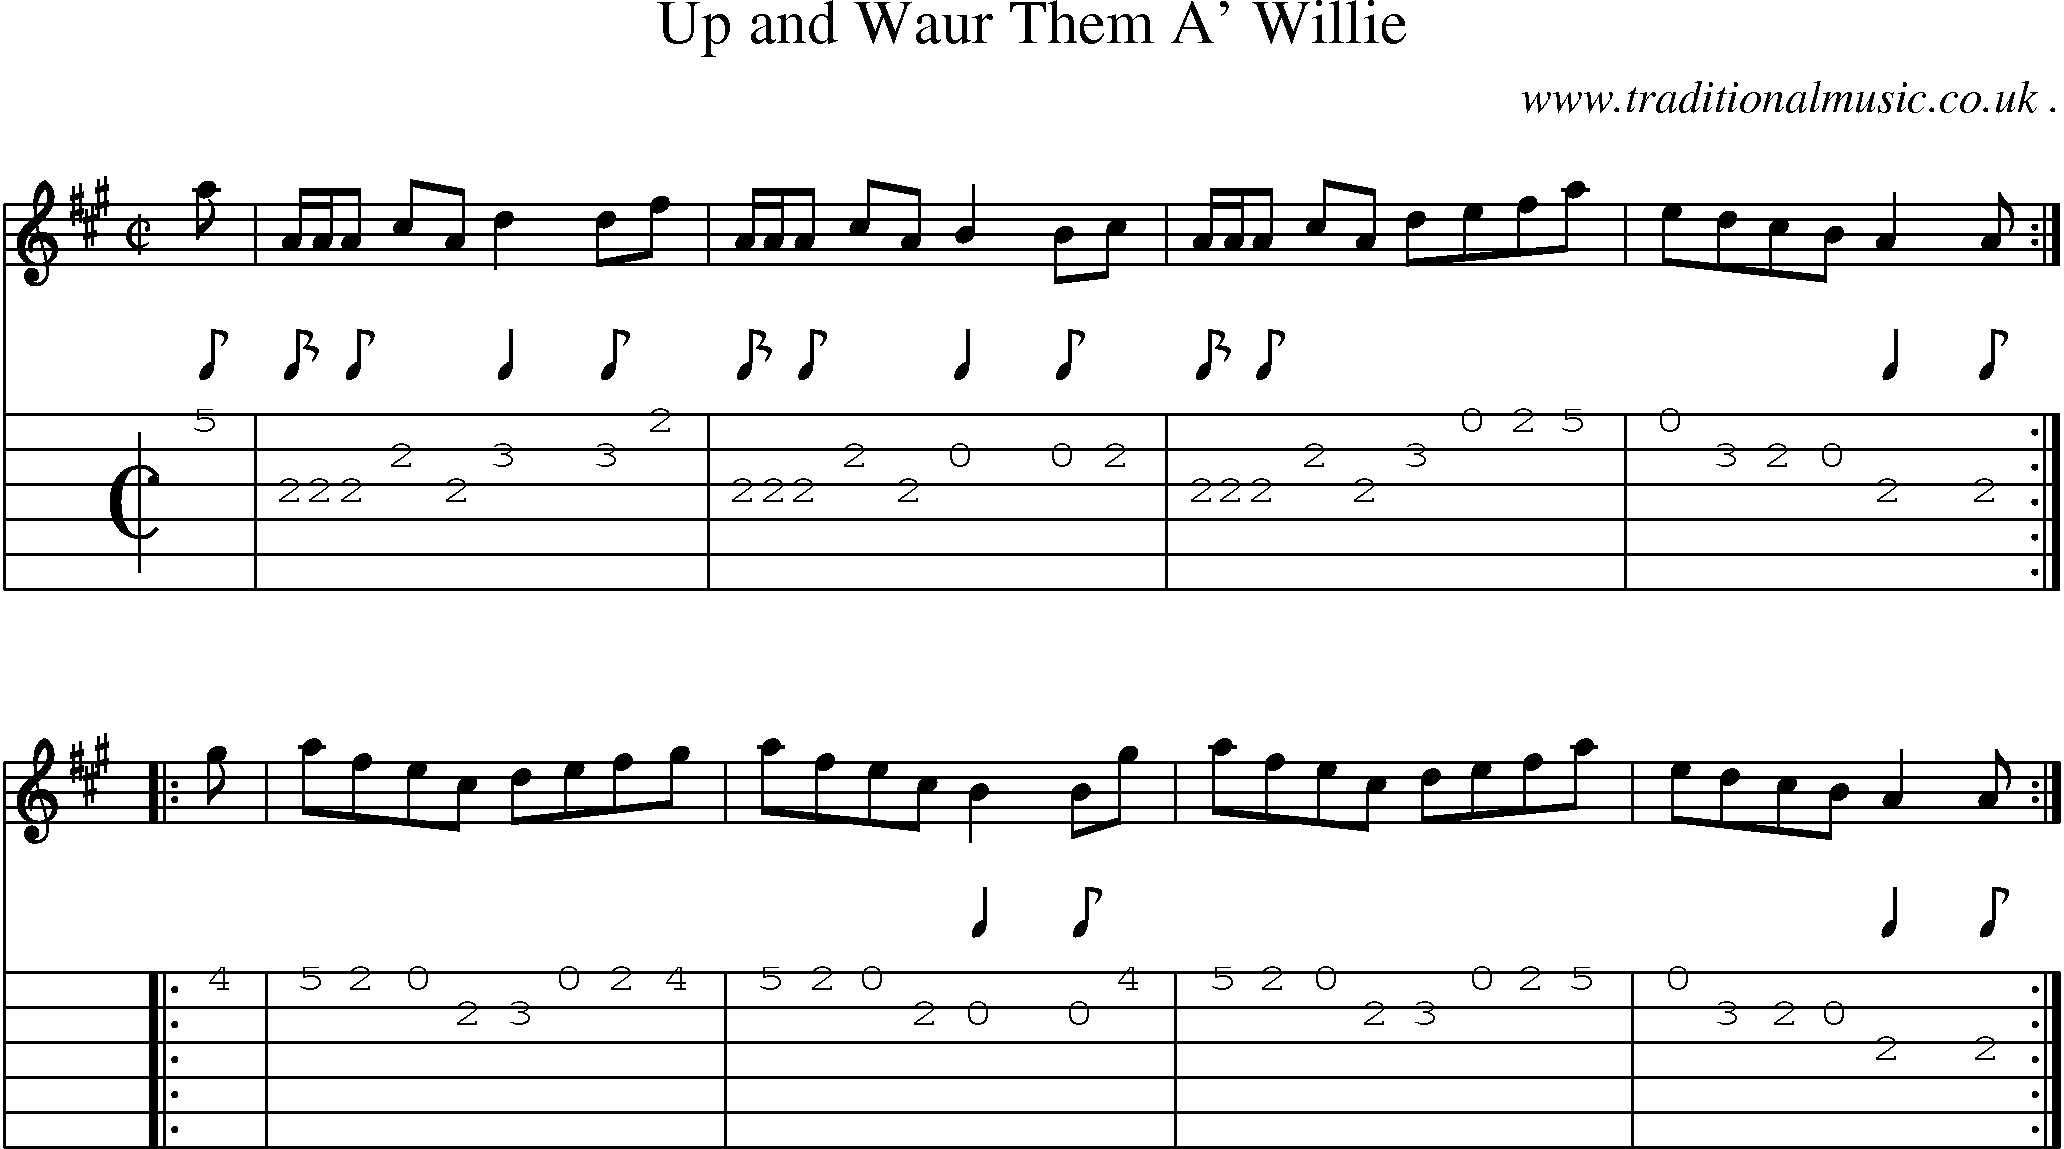 Sheet-music  score, Chords and Guitar Tabs for Up And Waur Them A Willie